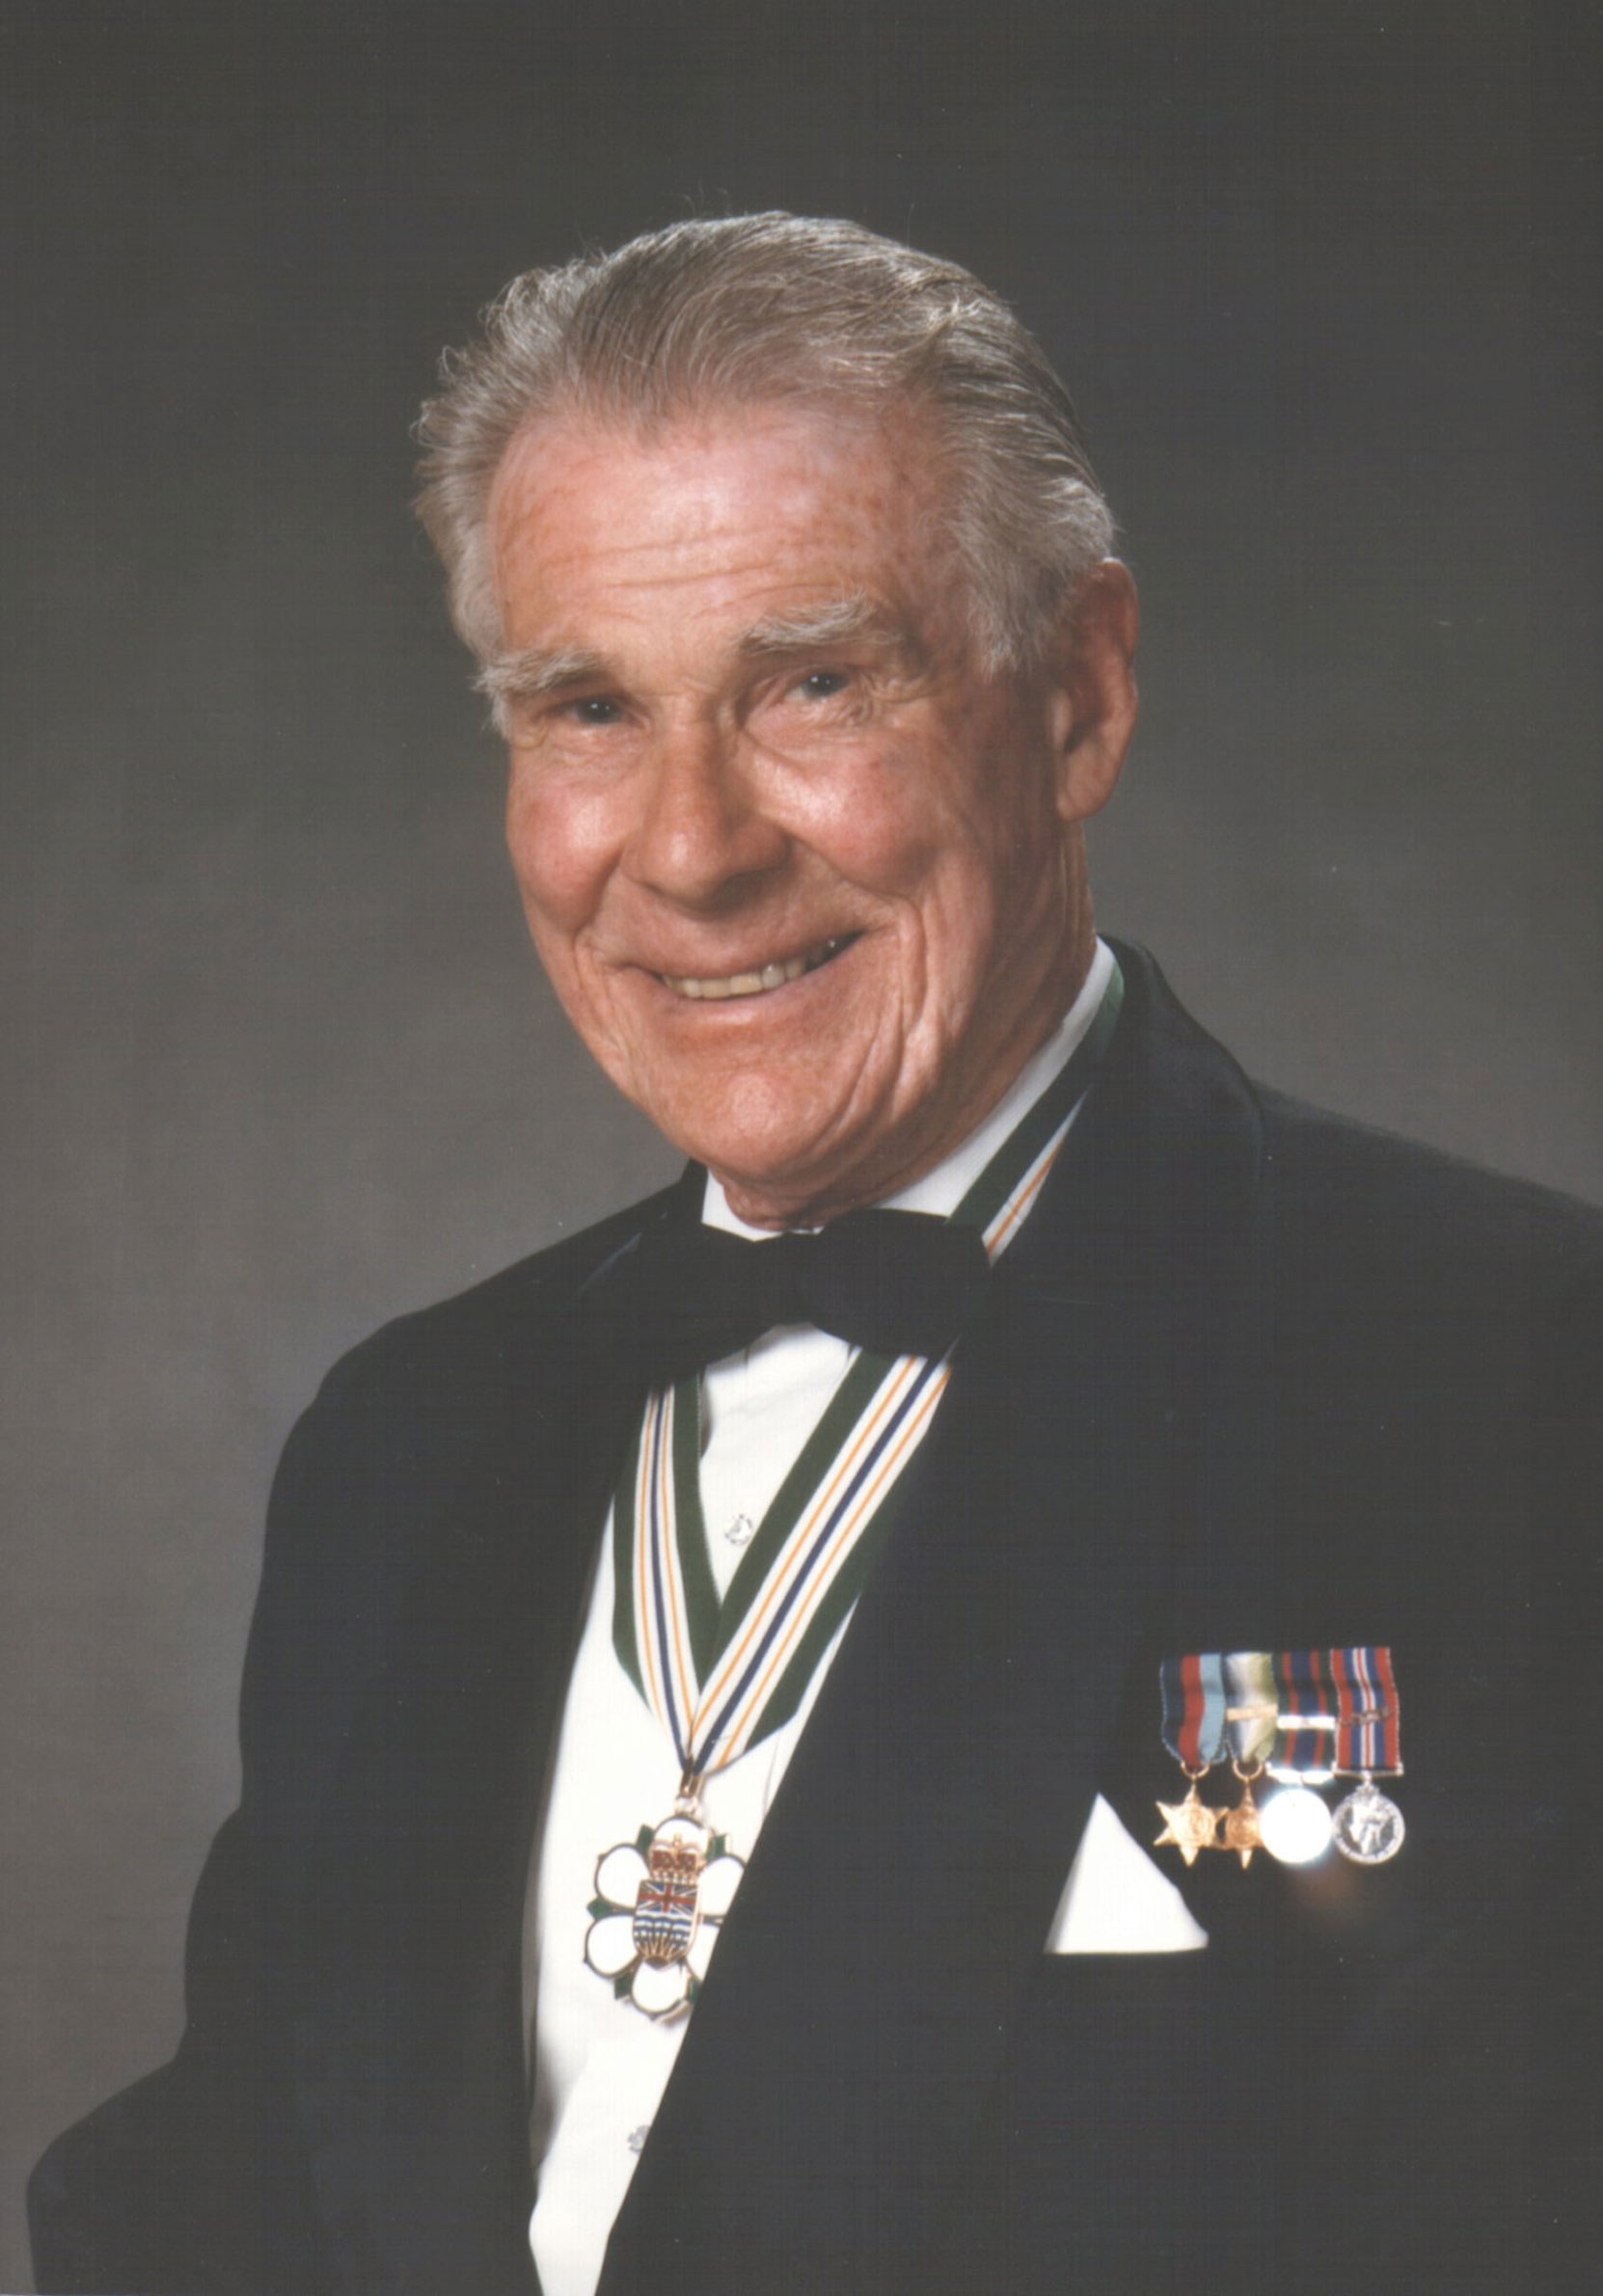 Robert Ian Ross with the Order of British Columbia, 1990